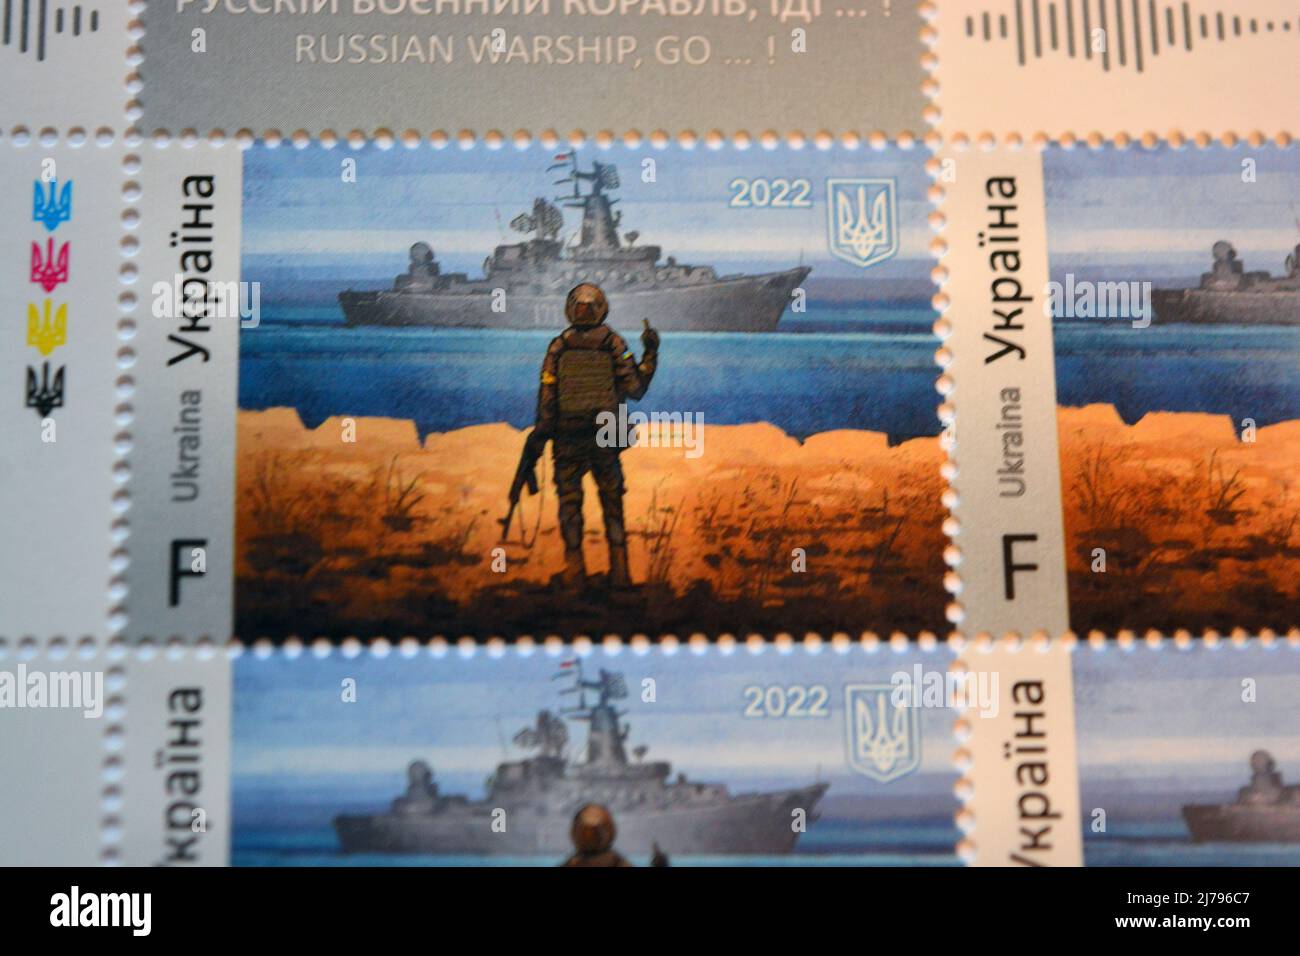 Postage Stamp Ukraine 2022 ,6 pcs stickers of  Russian warship go... Glory to heroes 1v with stamp F, Ukraine War done. Stock Photo